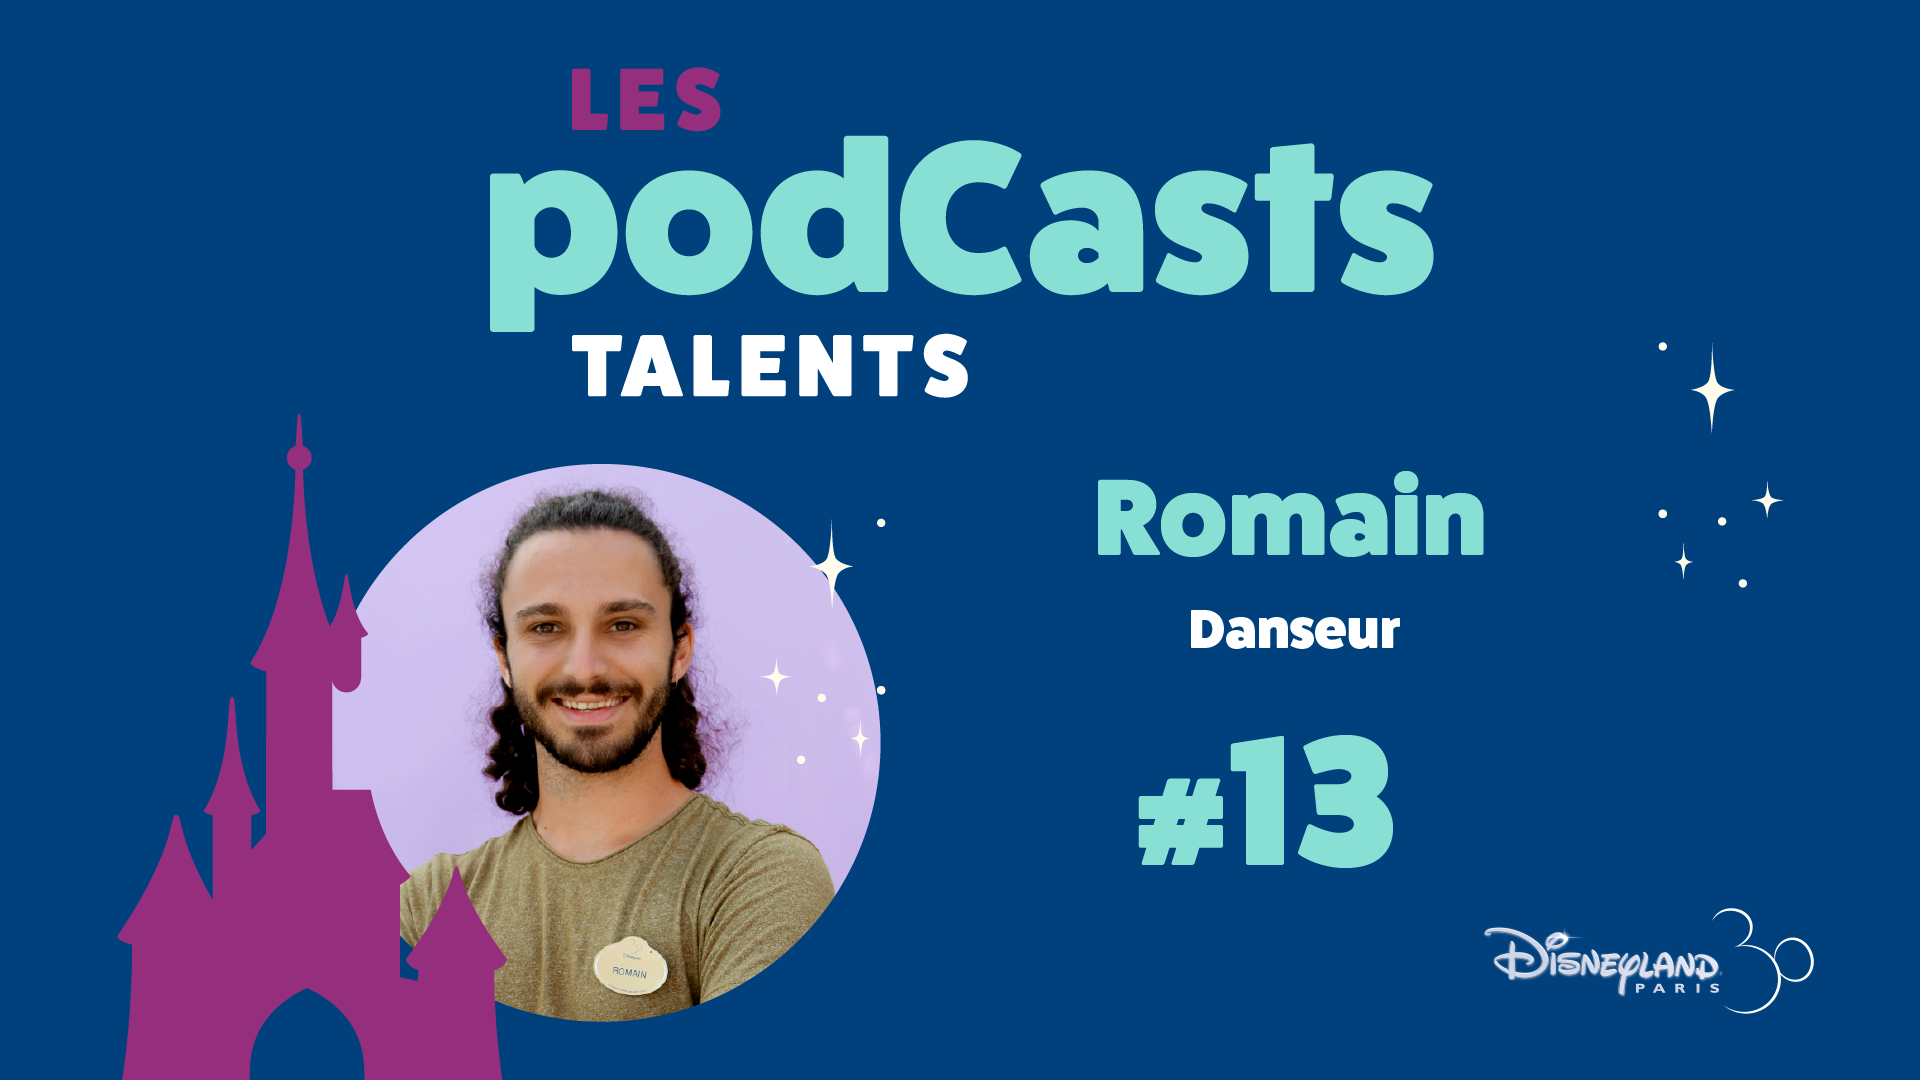 PODCASTS TALENTS SEASON 2: LISTEN TO THE NEW CAST MEMBERS TESTIMONIALS